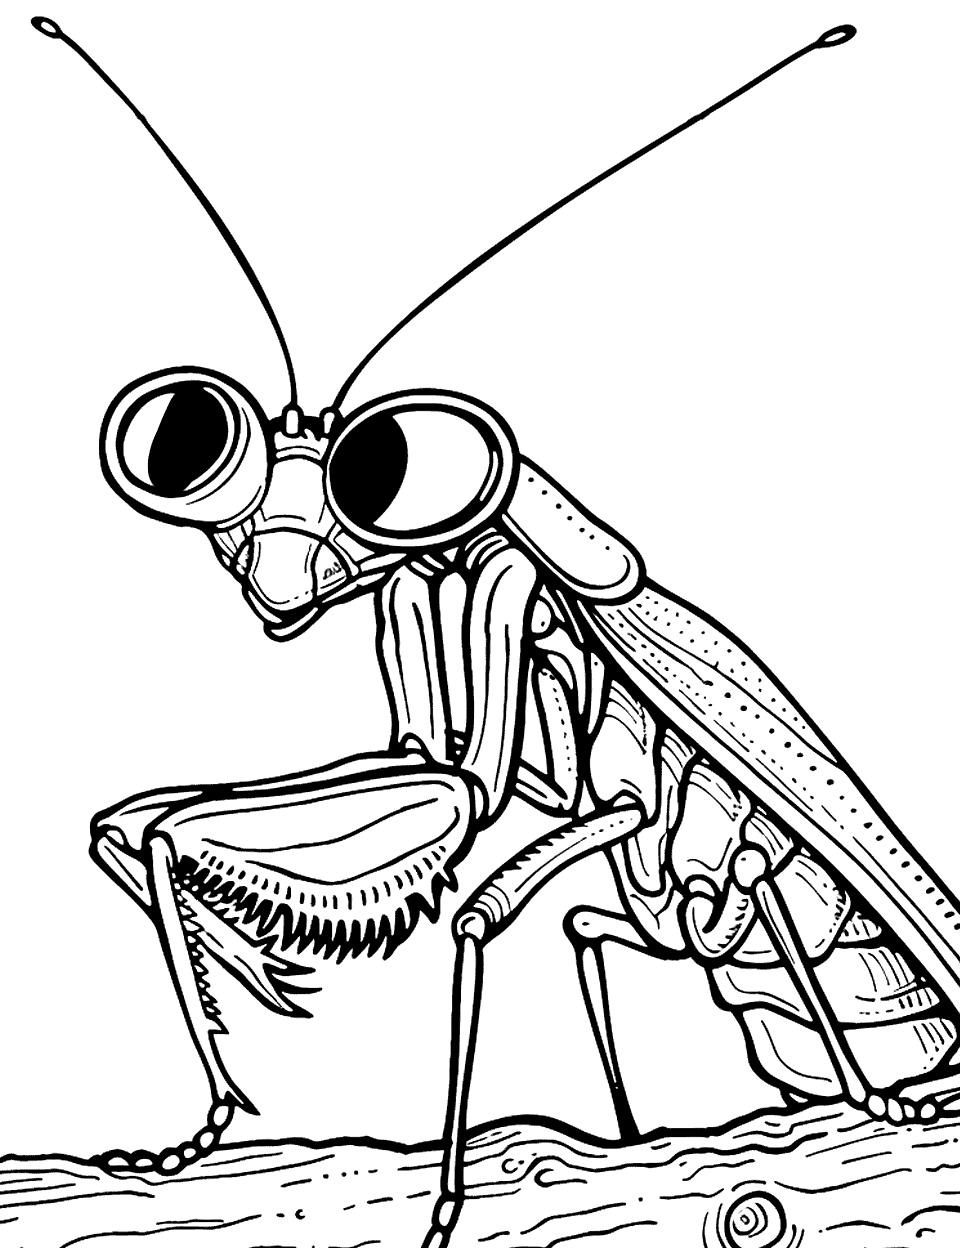 Cool Mantis Wearing Sunglasses Insect Coloring Page - A mantis casually chilling on a tree log while wearing cool sunglasses.